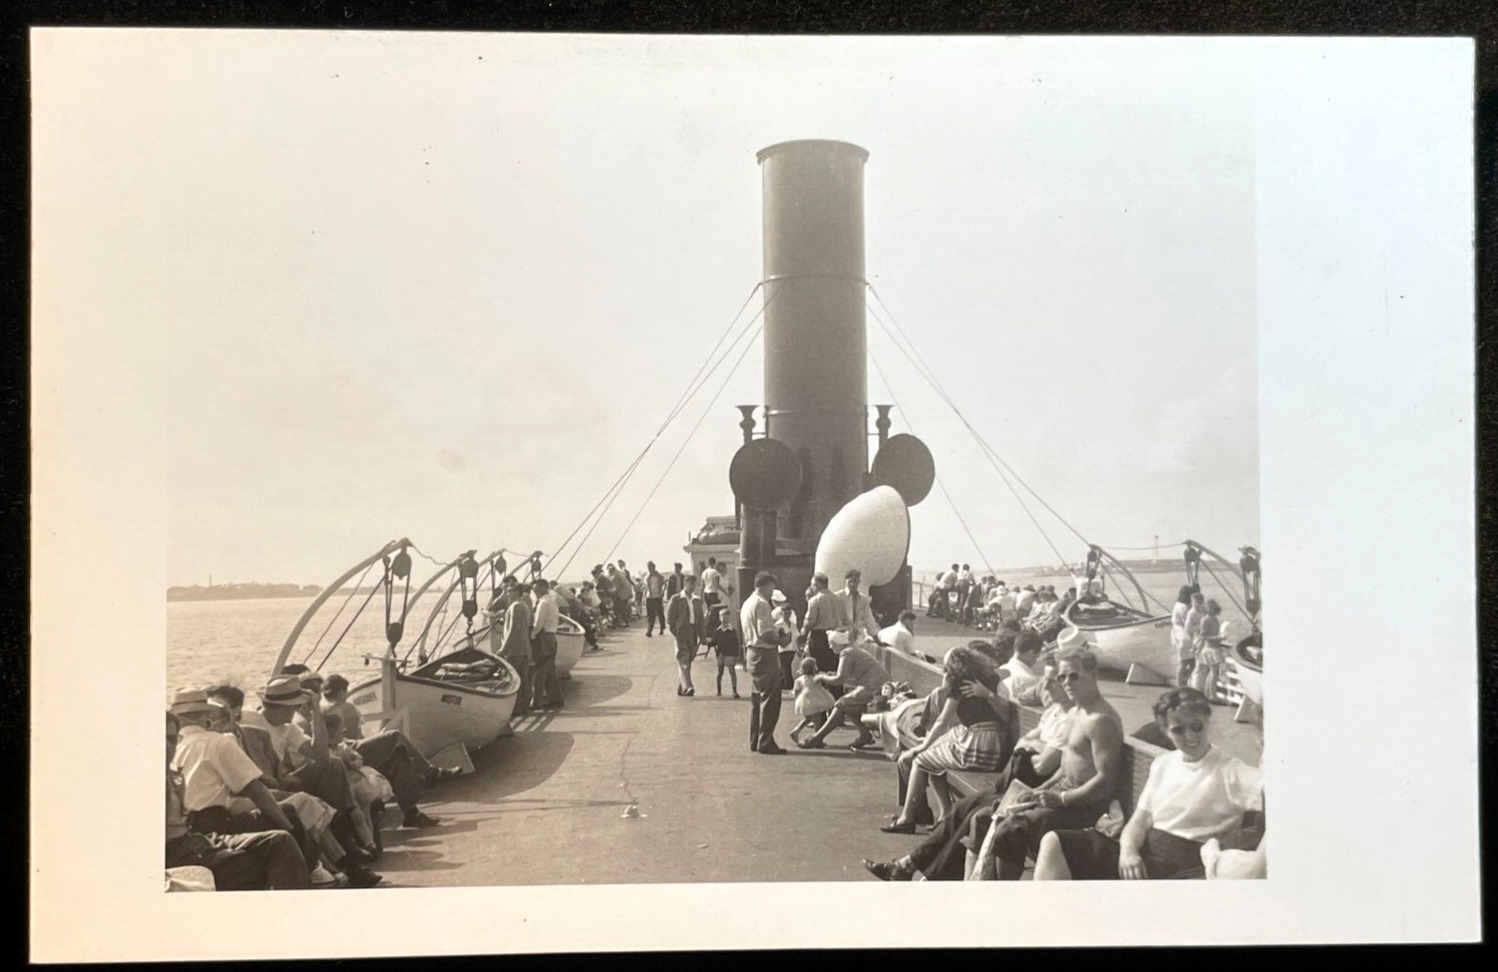 CIRCA 1946 B&W PHOTOGRAPH - VIEW OF PEOPLE ONBOARD THE STEAMBOAT NANTASKET